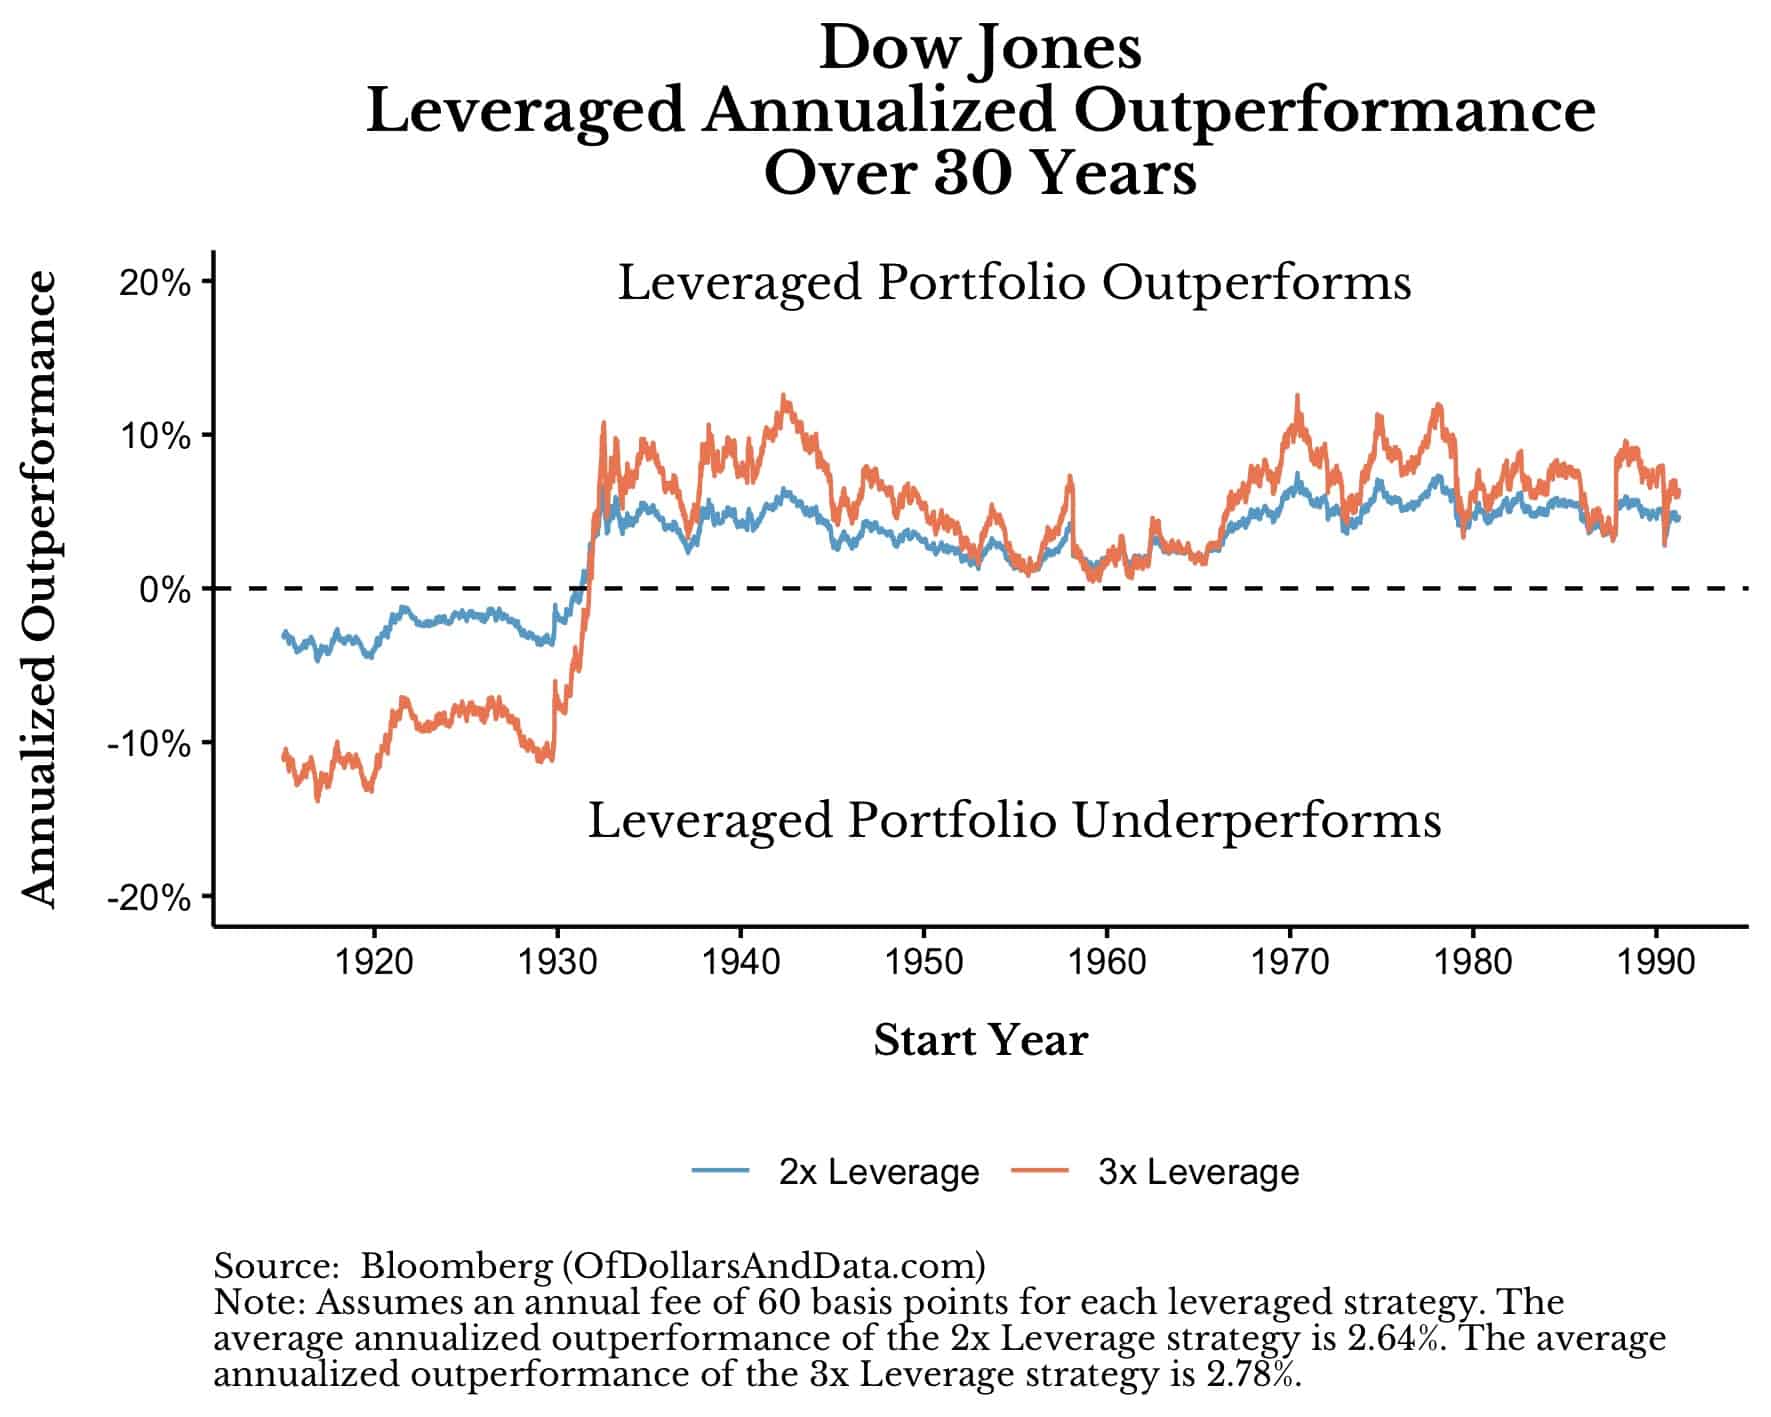 Dow 2x and 3x levered portfolios performance over 30 year rolling periods since 1915